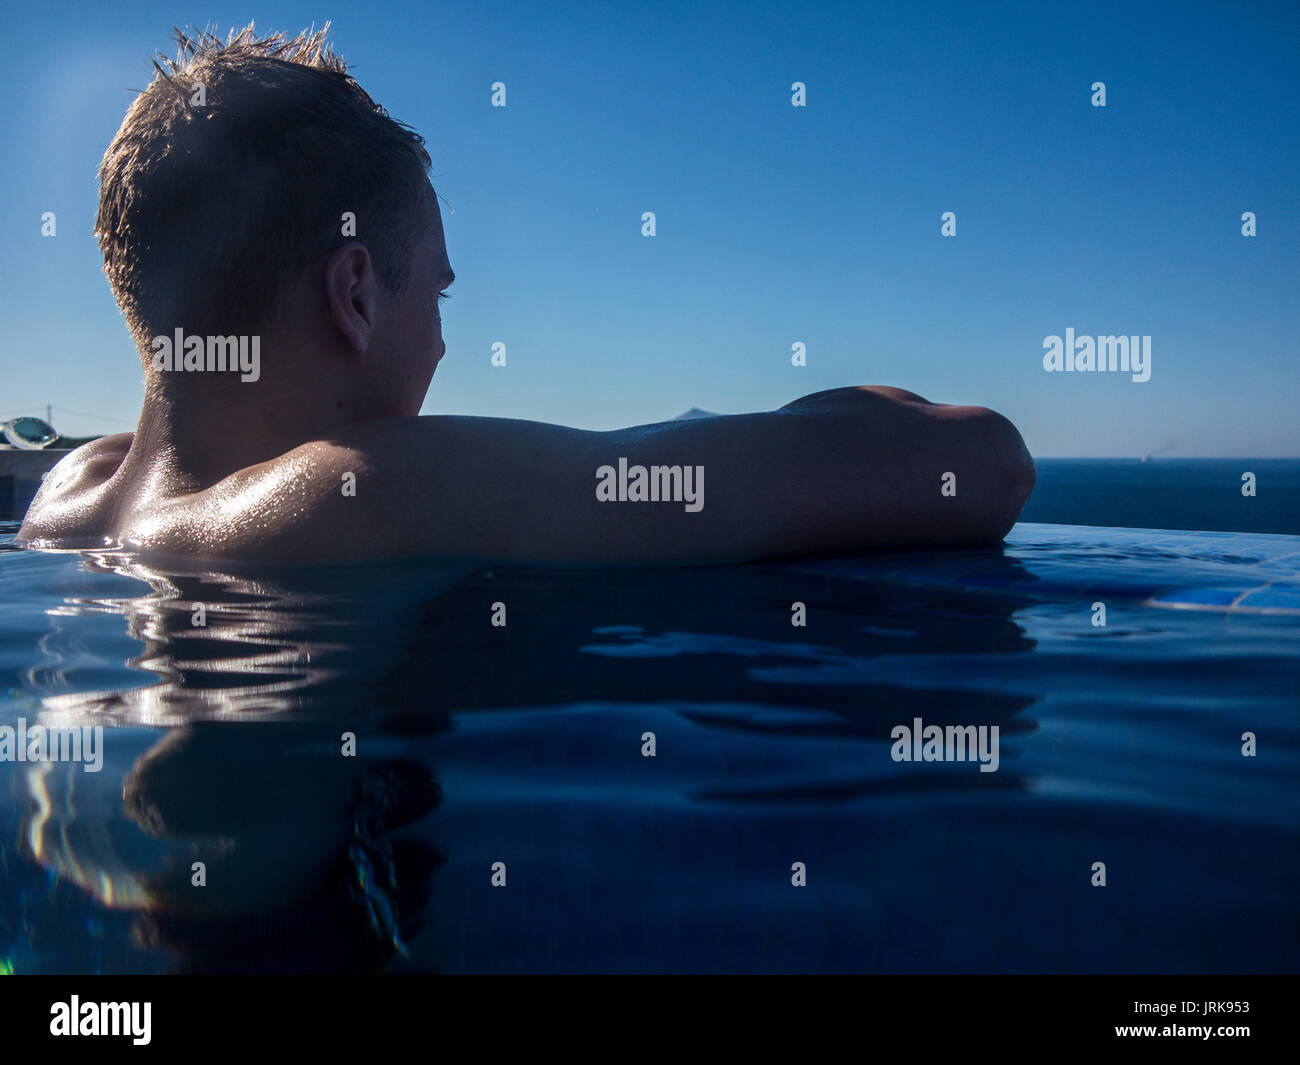 A muscular teenager enjoys the view in an infinity pool Stock Photo